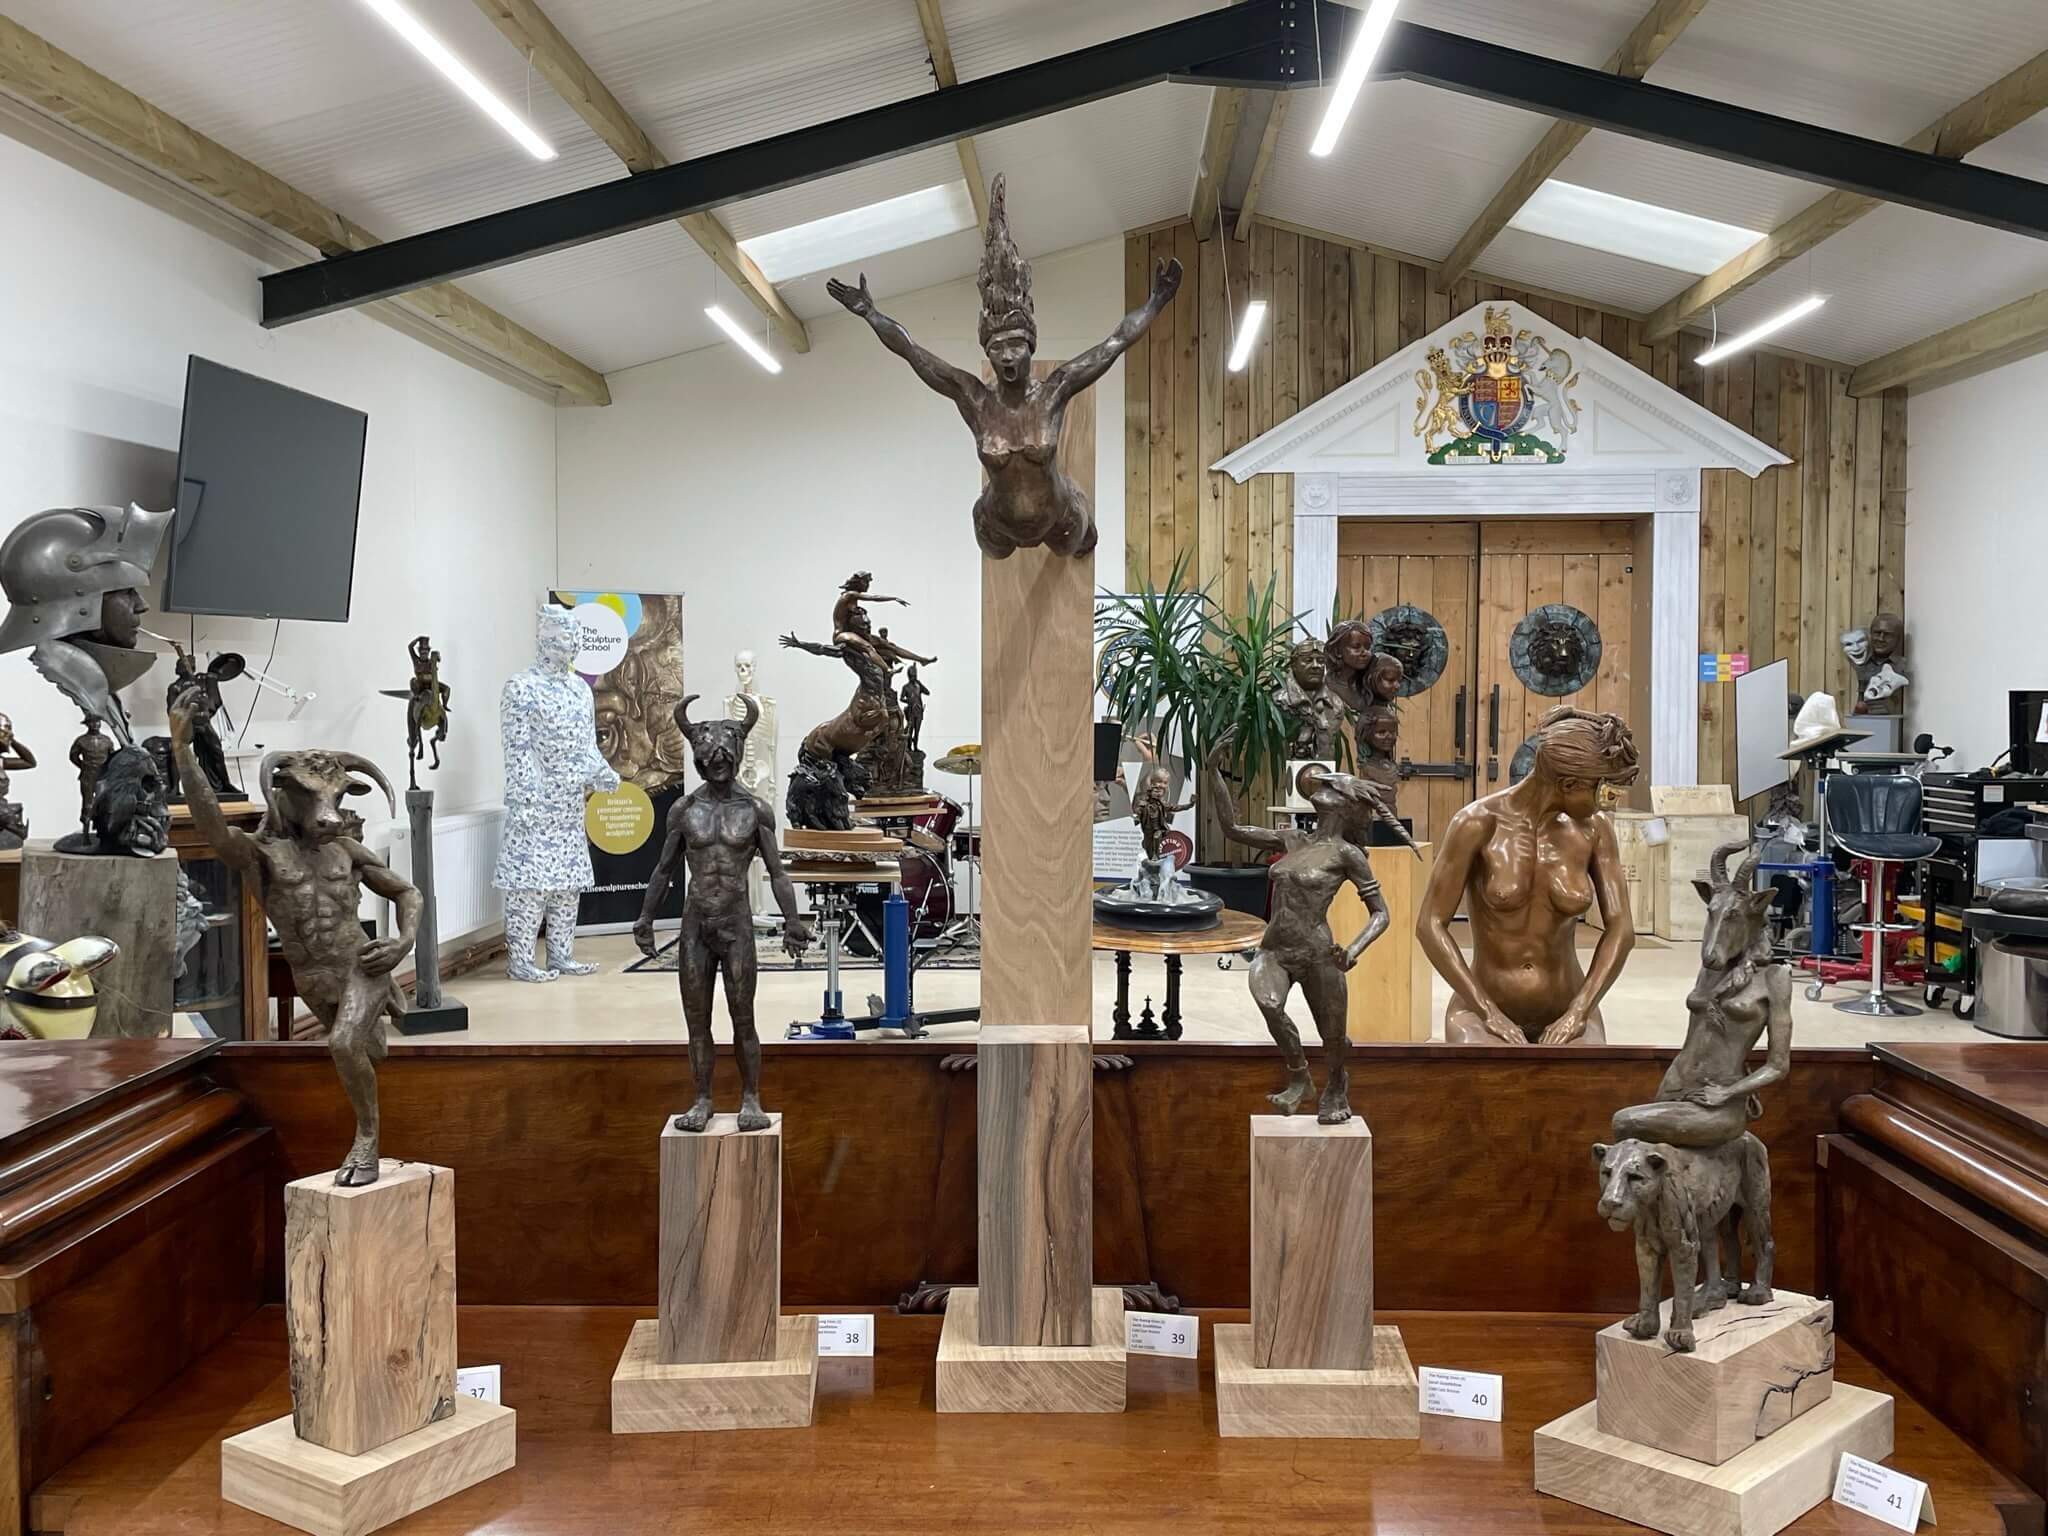 Fancy Becoming a Professional Realist Sculptor?